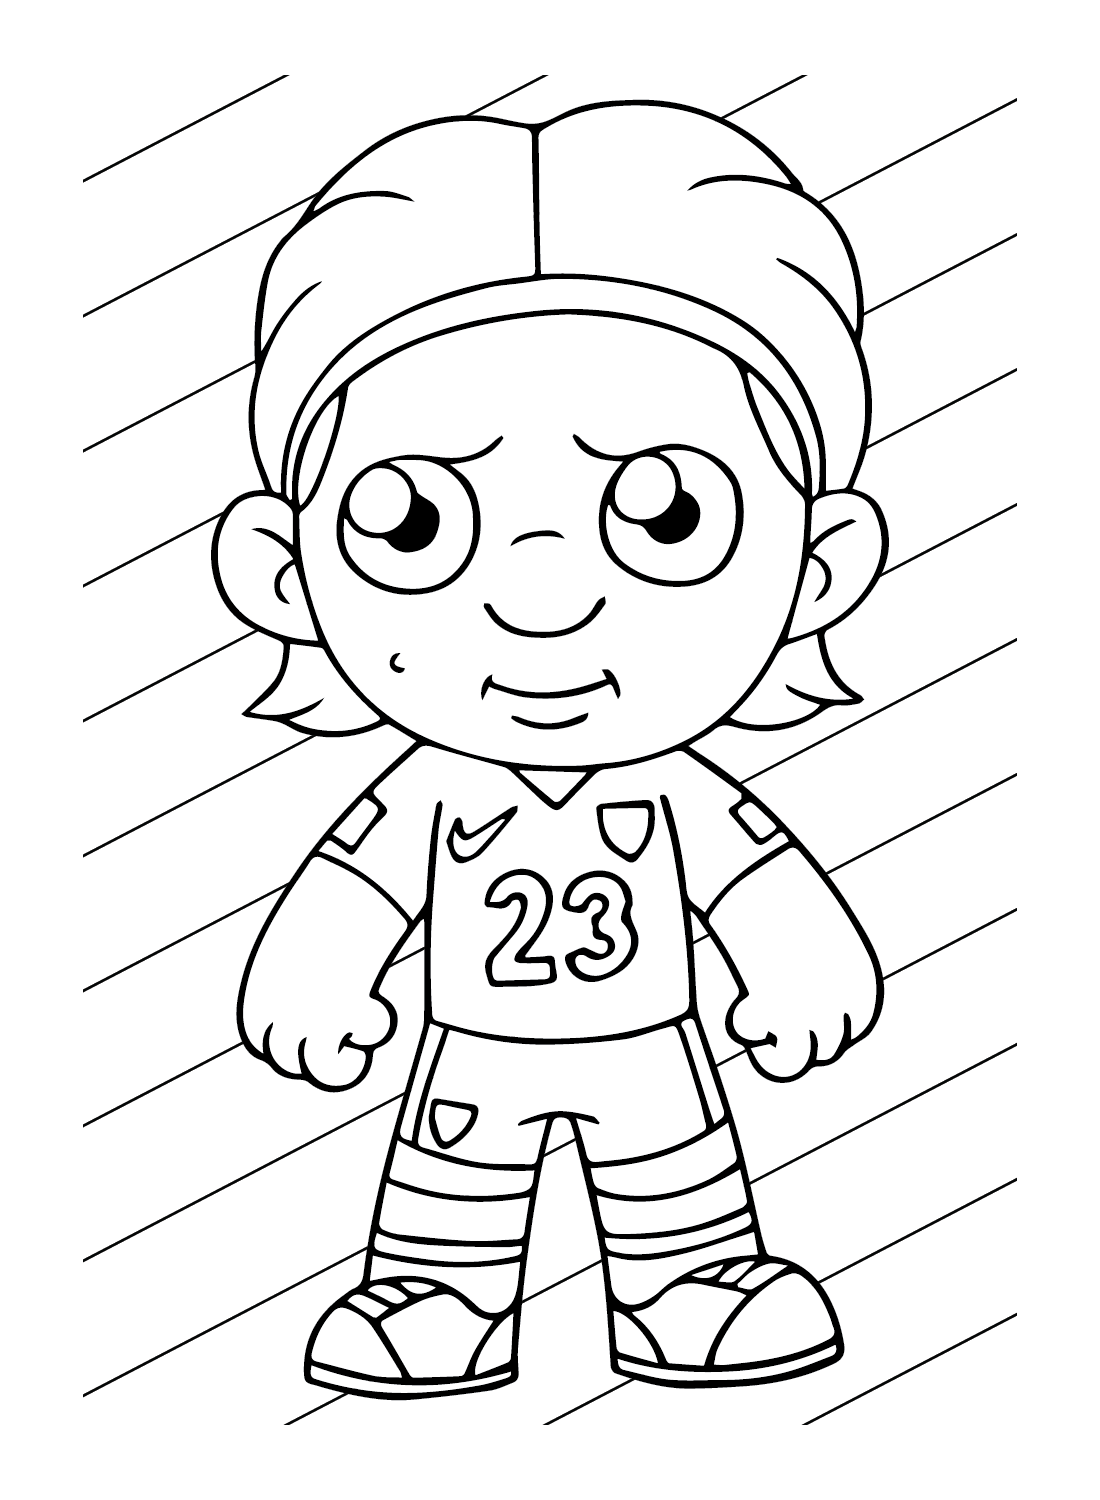 Erling Haaland Chibi Coloring Pages